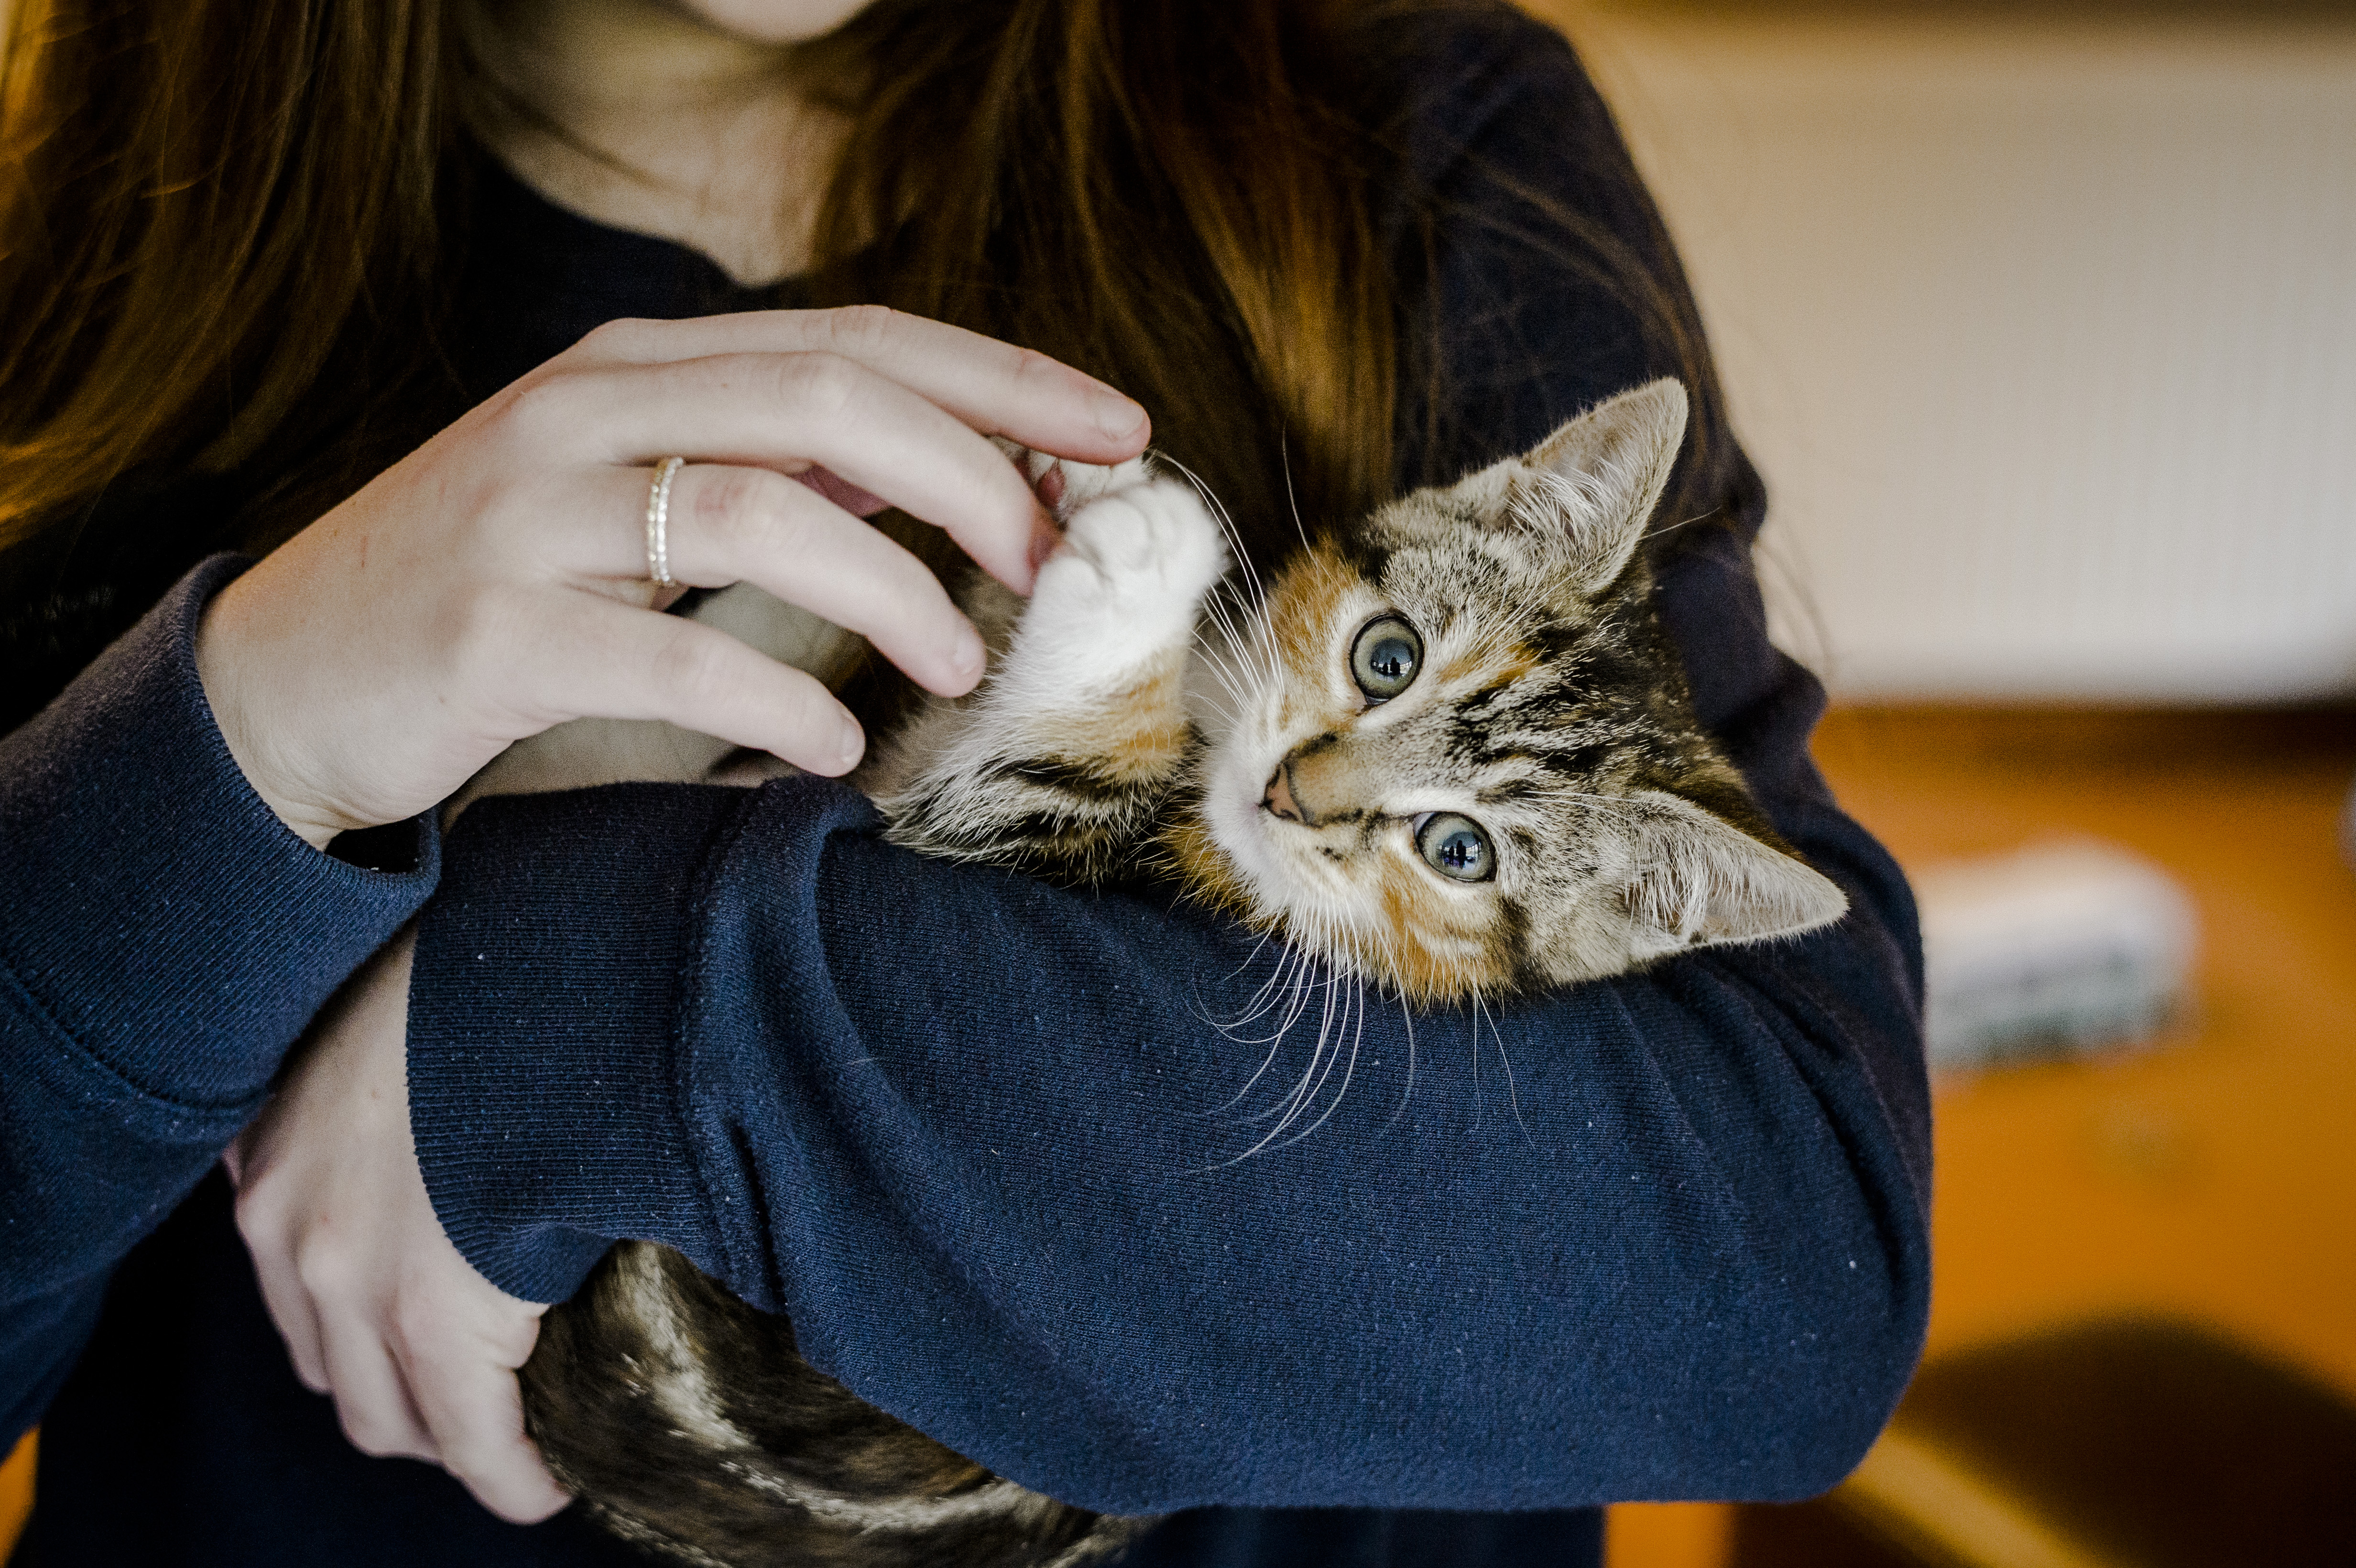 Tabby kitten in the arms of a woman